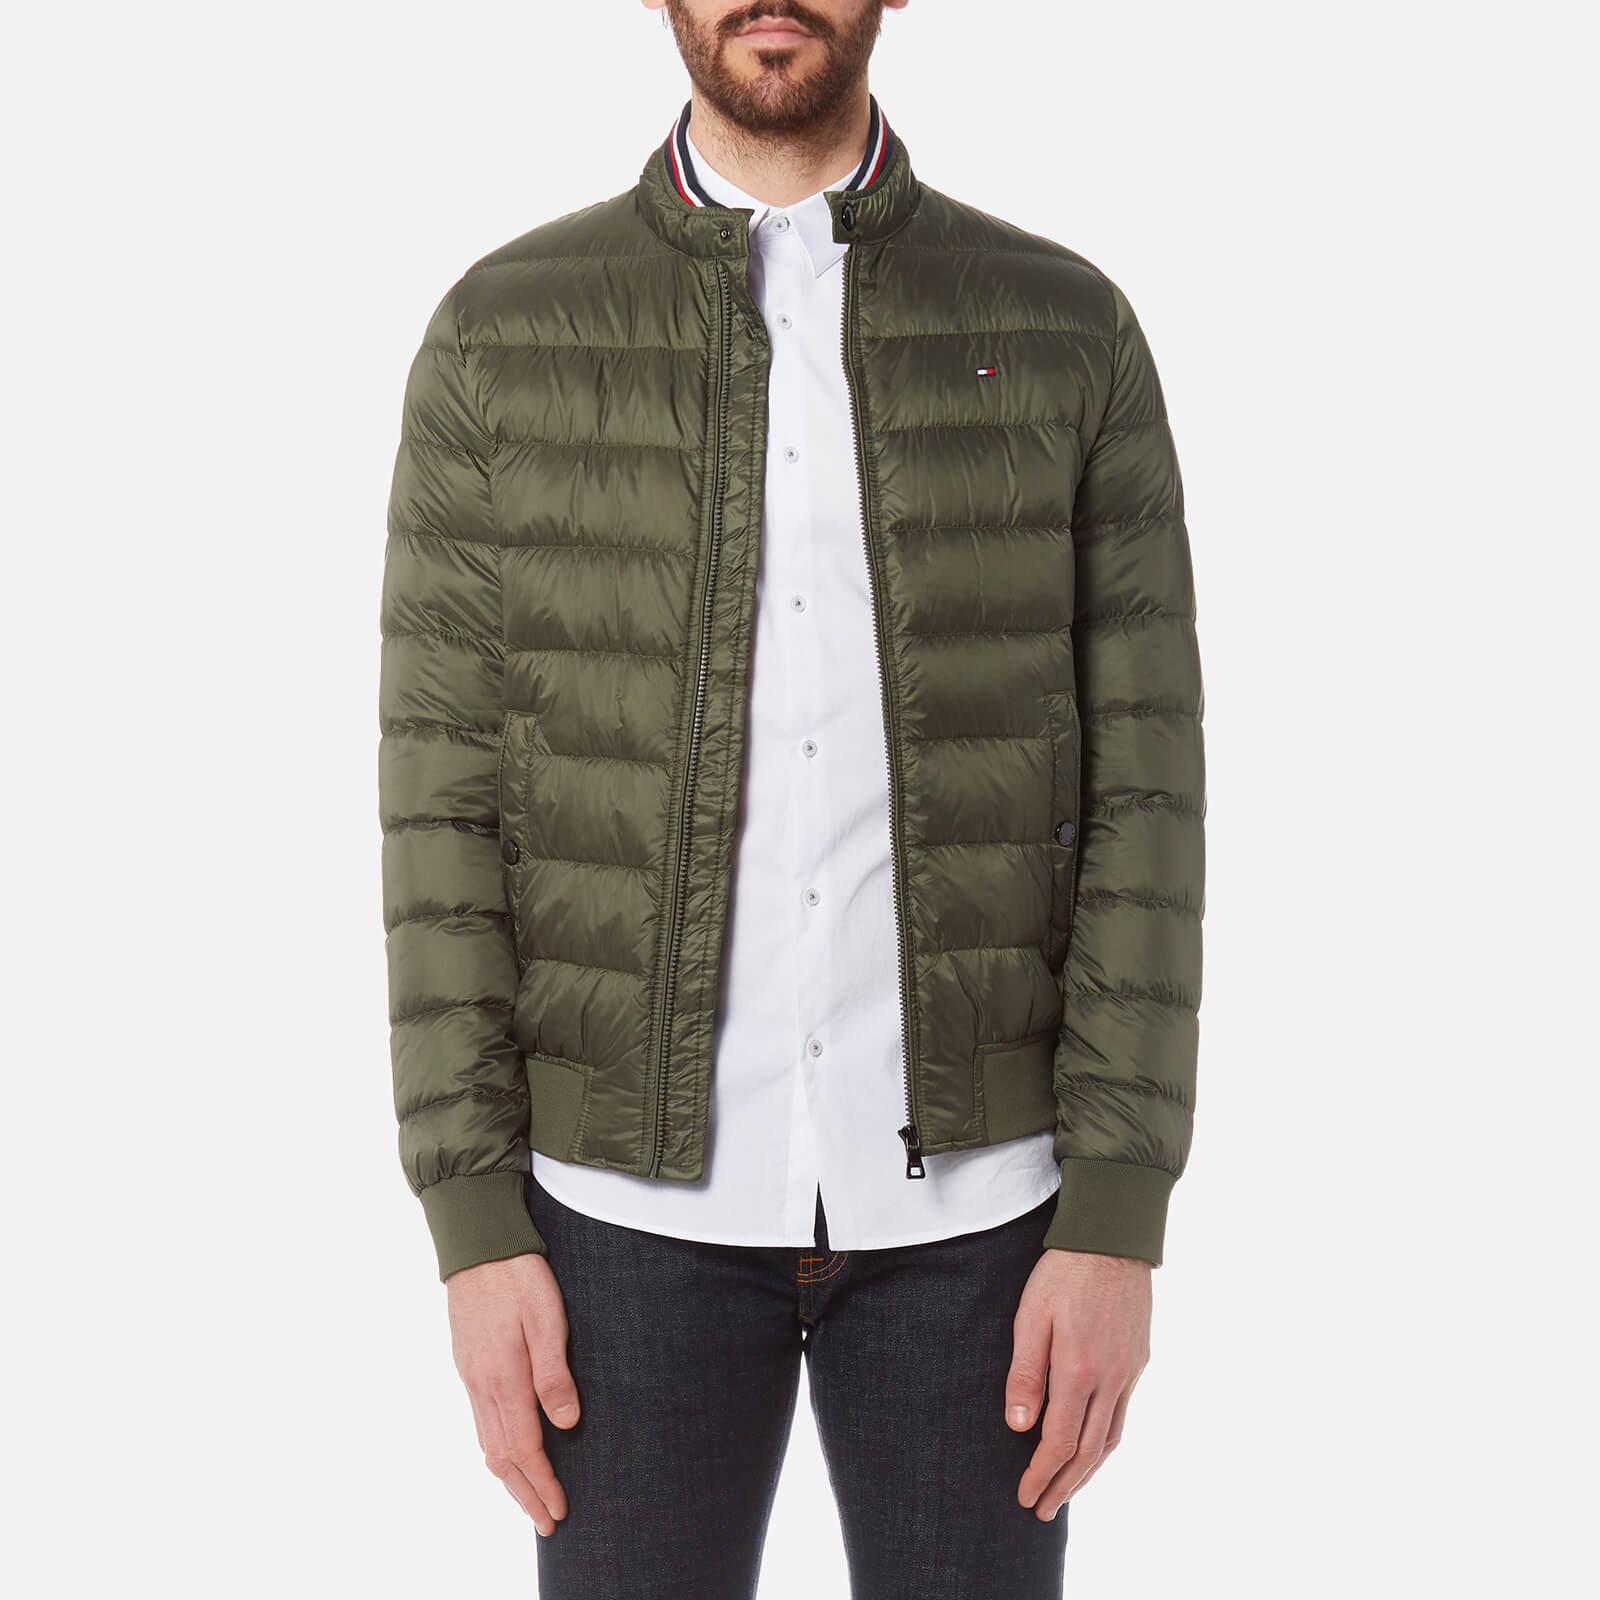 Arlos Bomber Tommy Hilfiger Flash Sales, 54% OFF | www.smokymountains.org